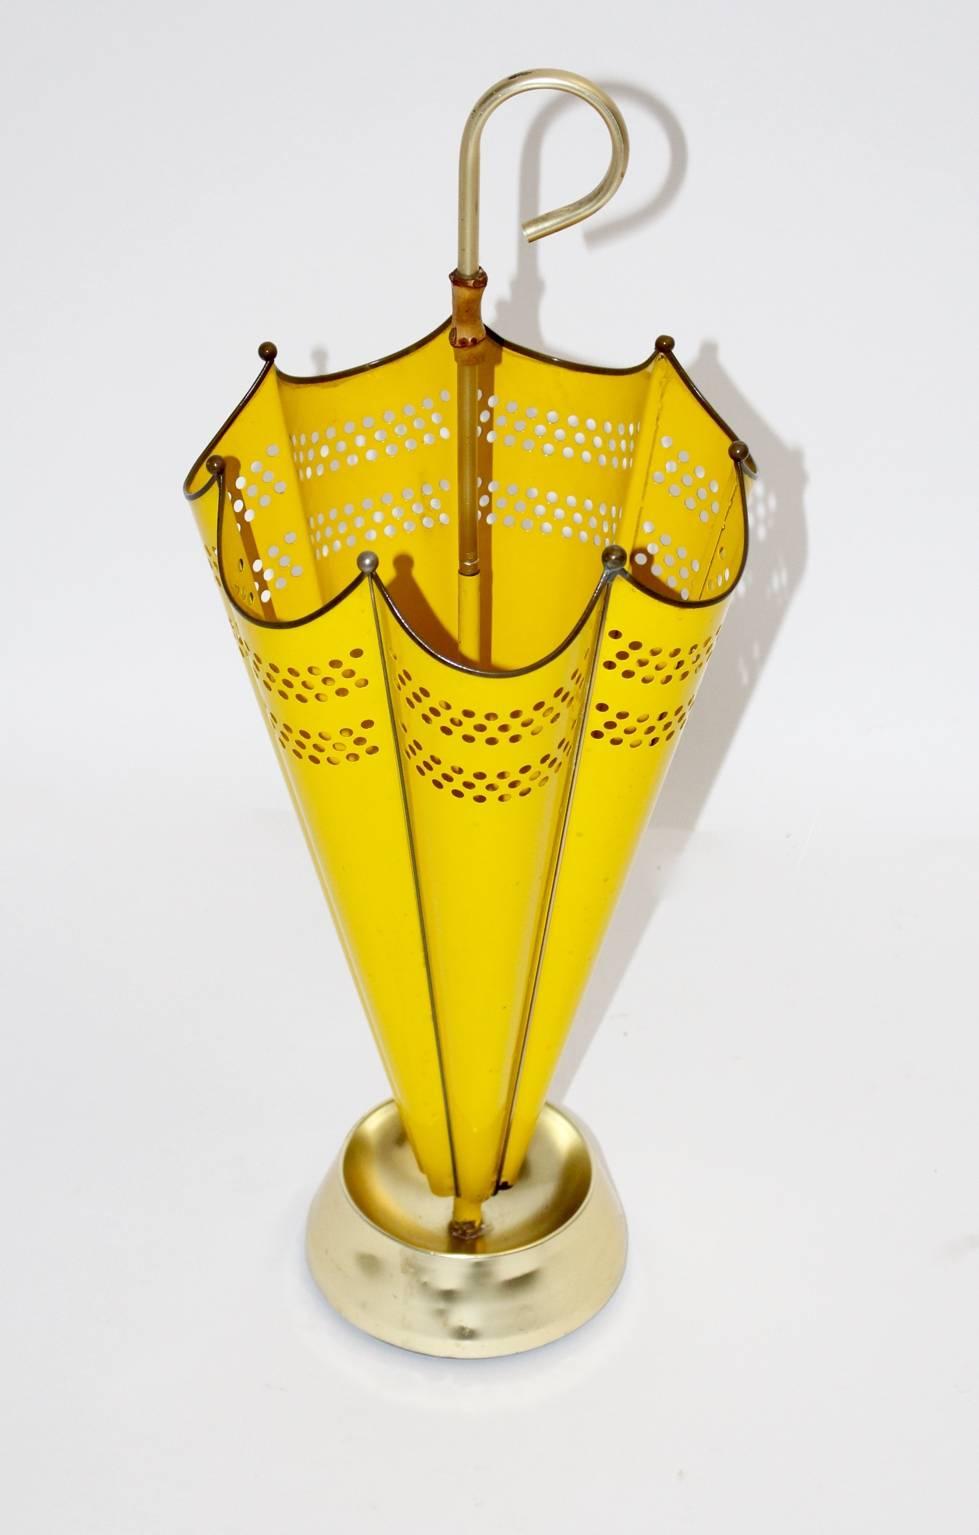 A mid century modern vintage yellow umbrella stand, which is shaped like an umbrella.
Furthermore it was designed and manufactured during the 1950s, Italy.
The umbrella stand was partly made of perforated sheetmetal and lacquered in a sunny yellow